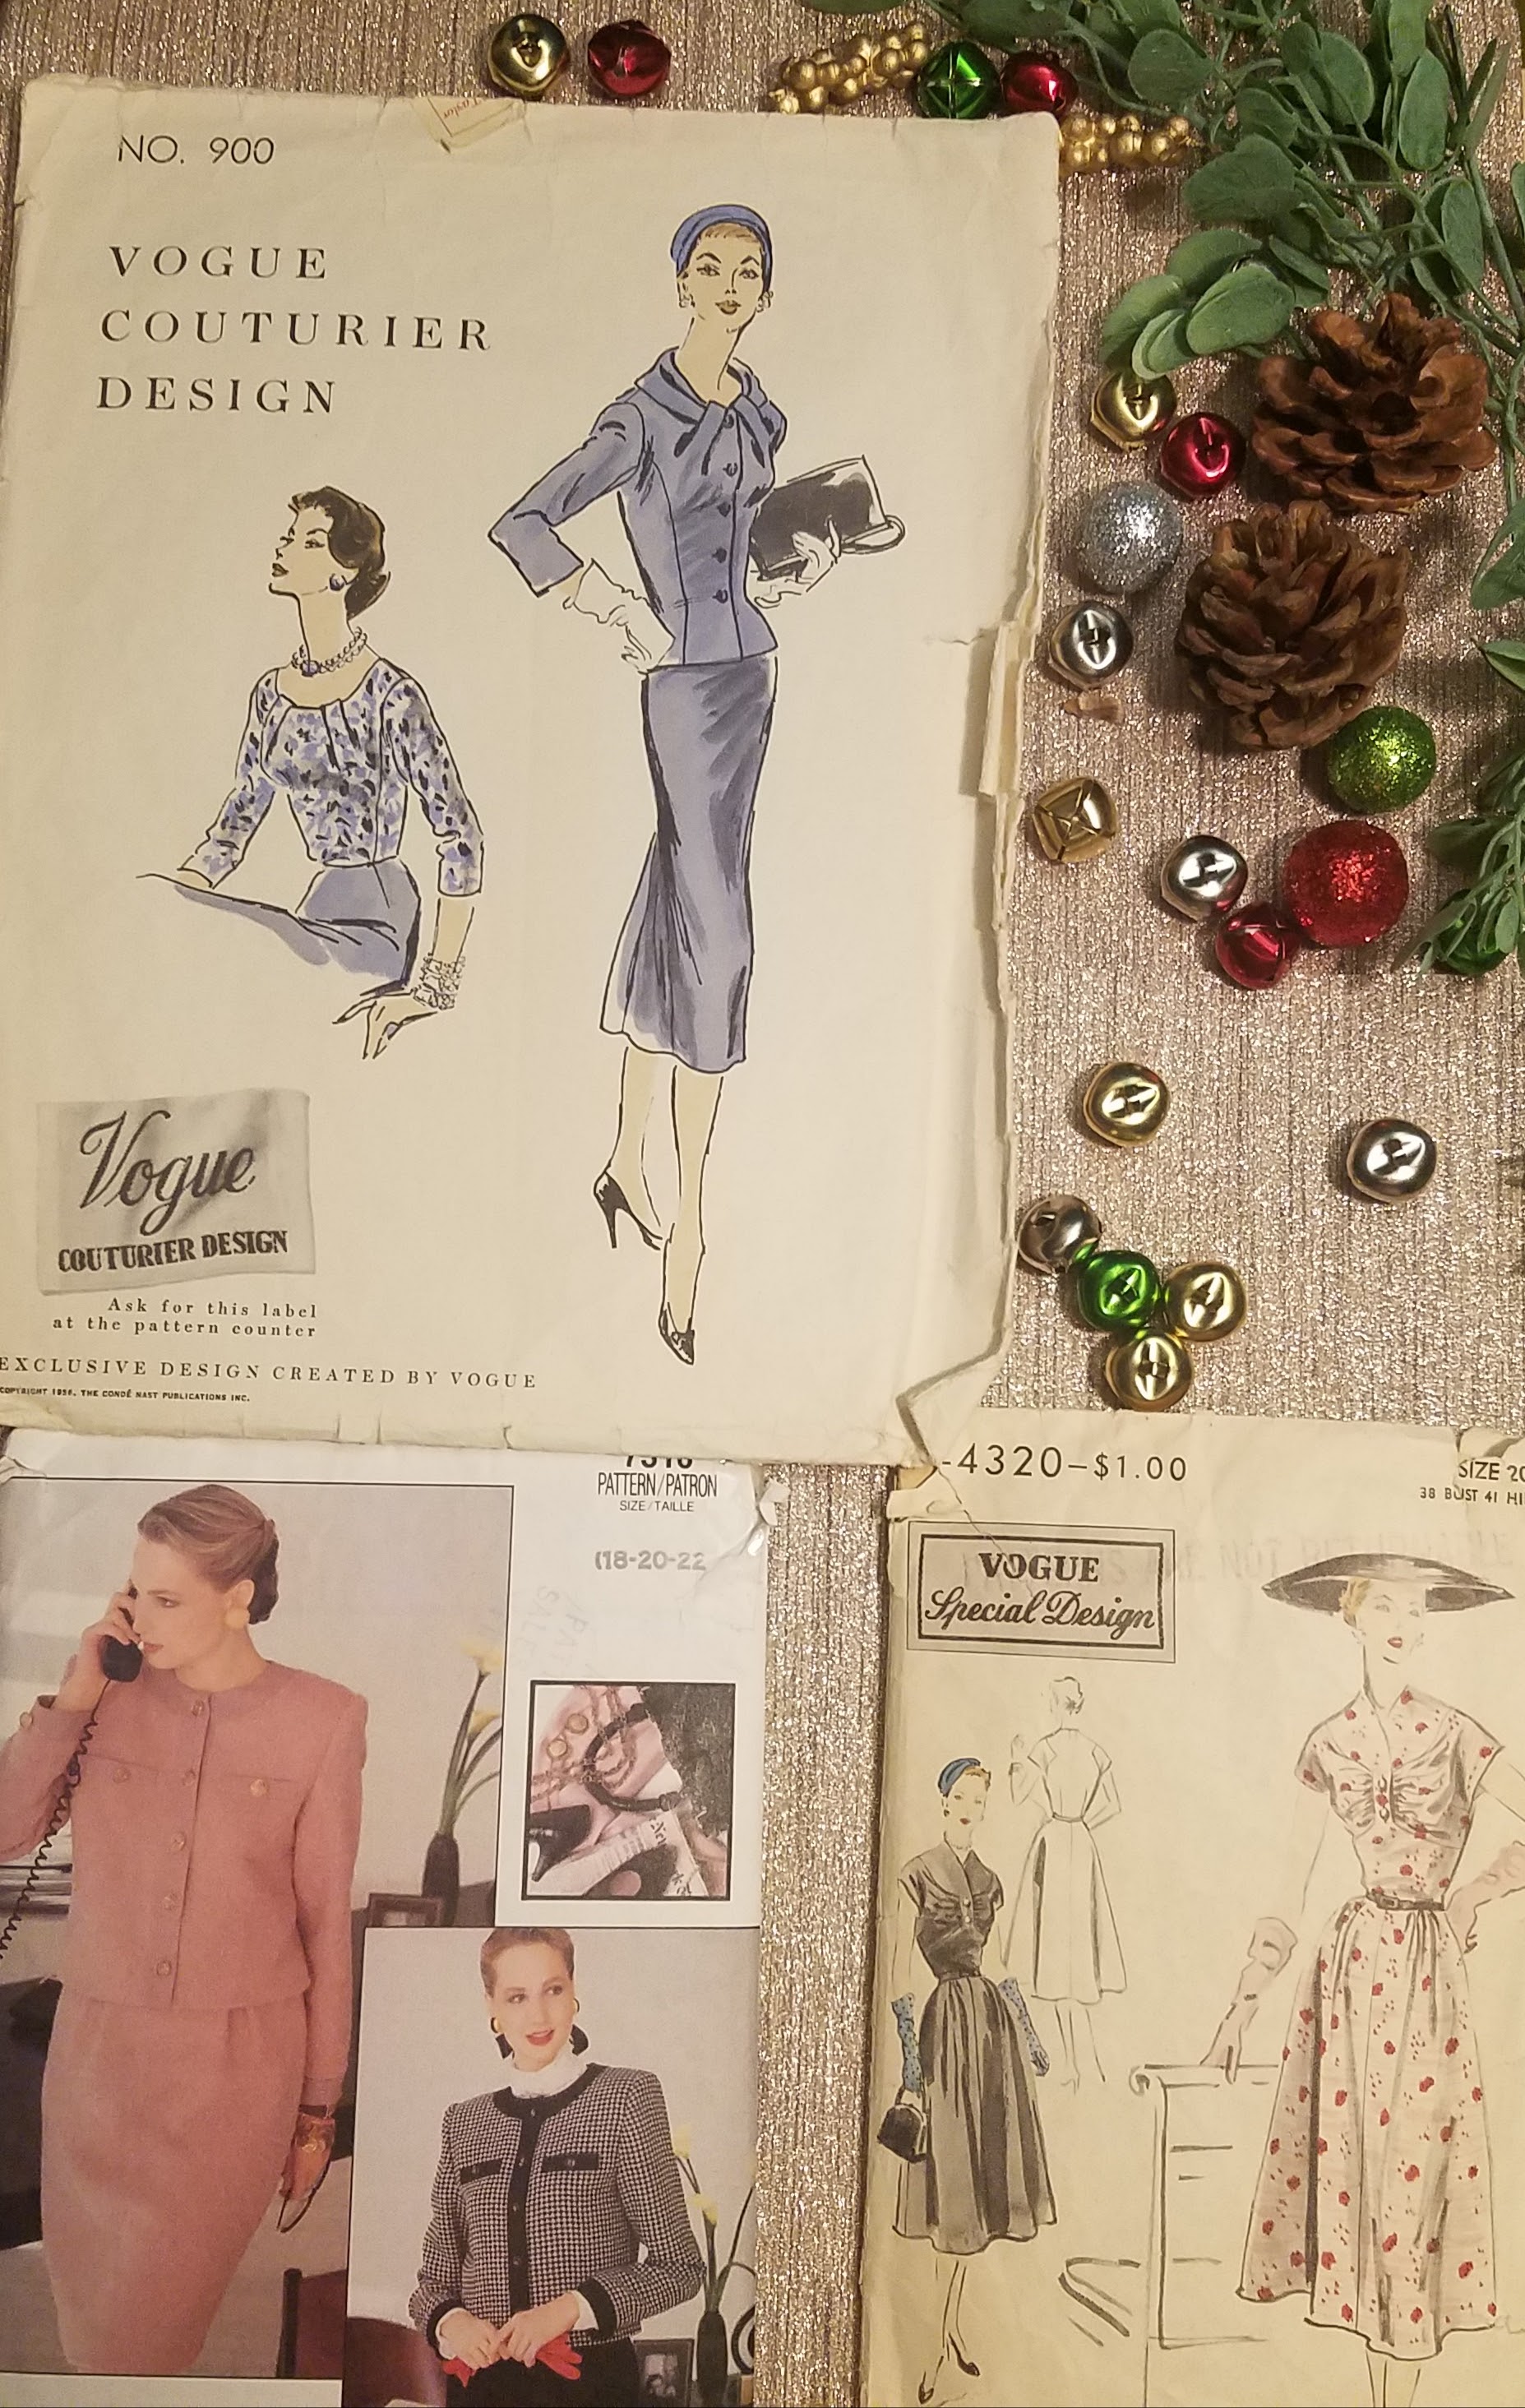 An introduction to Christian Dior - The Vintage Pattern Shop